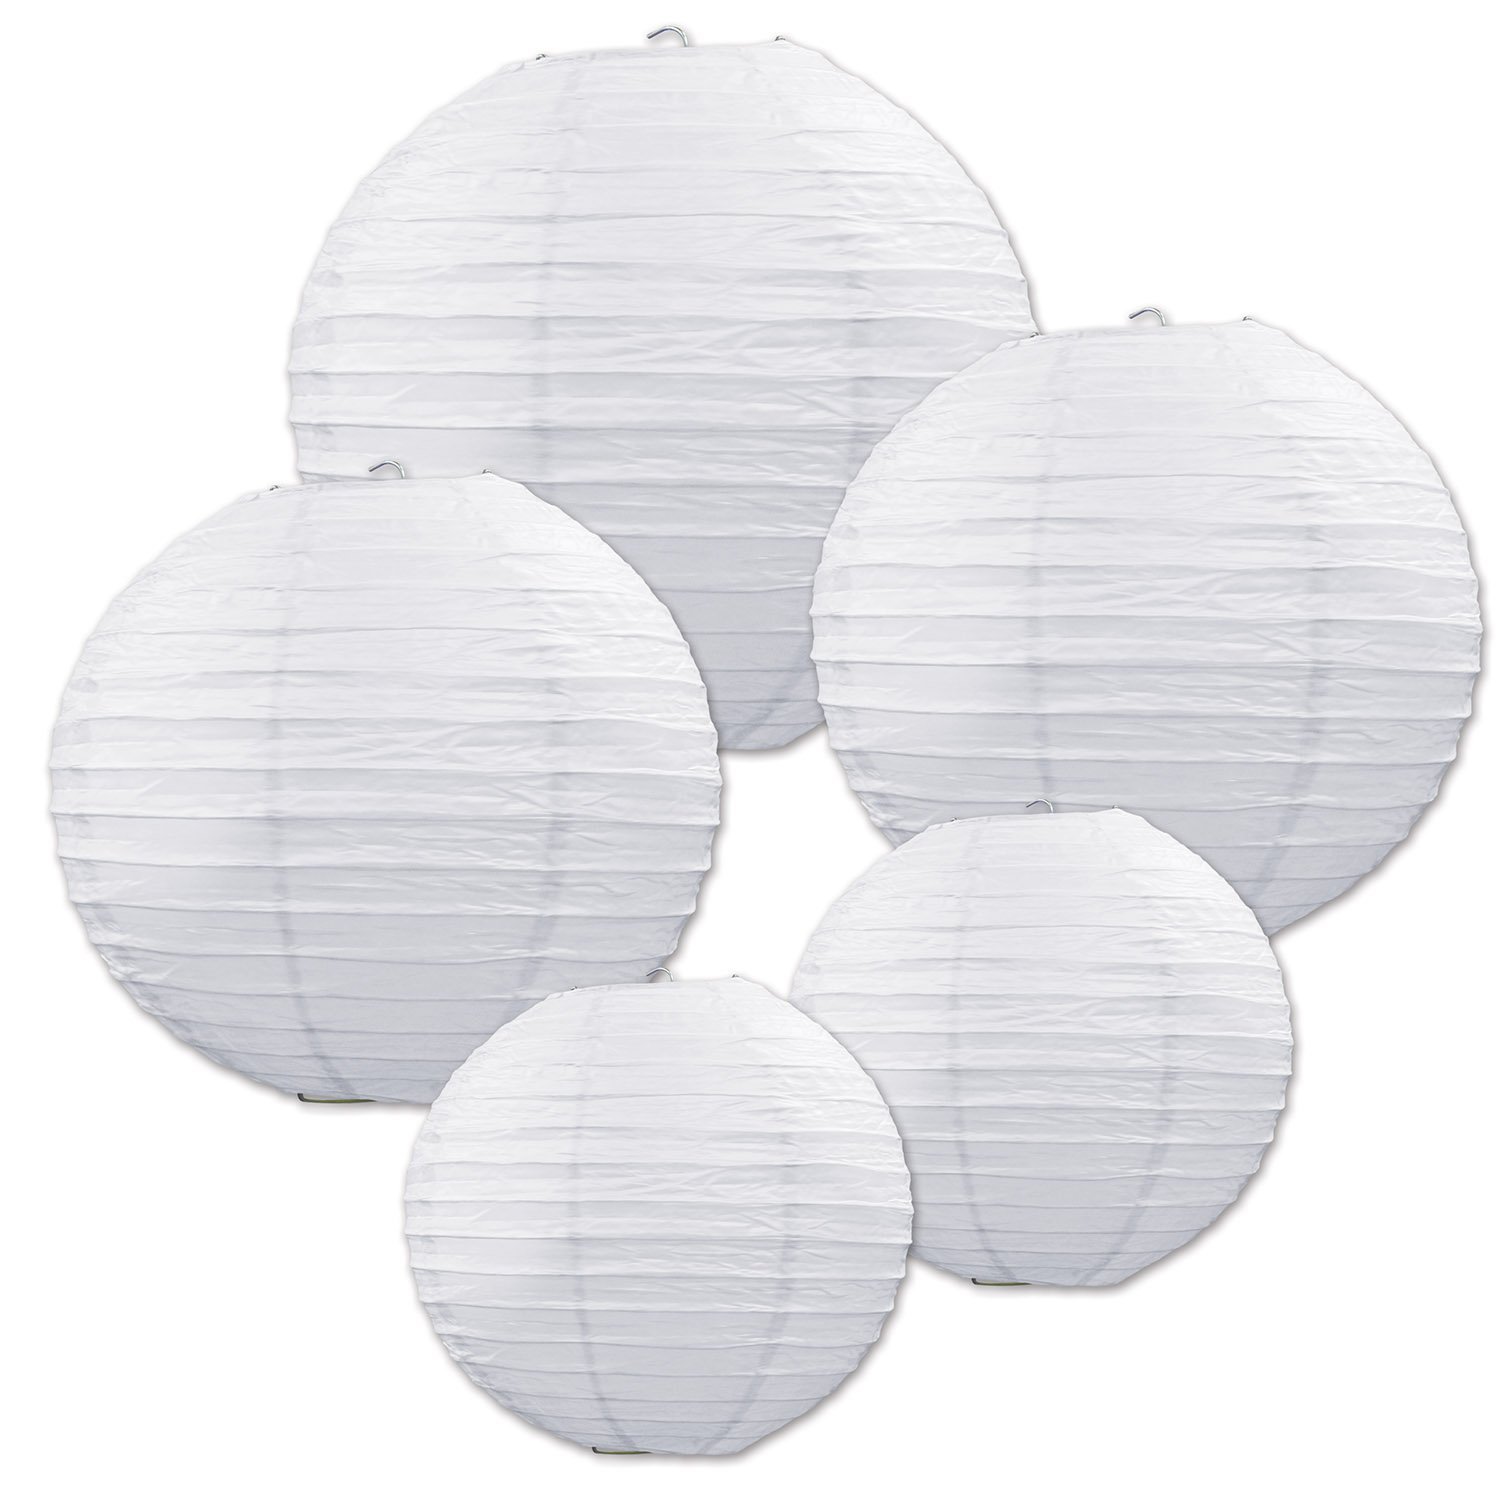 Paper Lantern ceiling instalation in chicago naperville belvedere ceiling draping.jpg